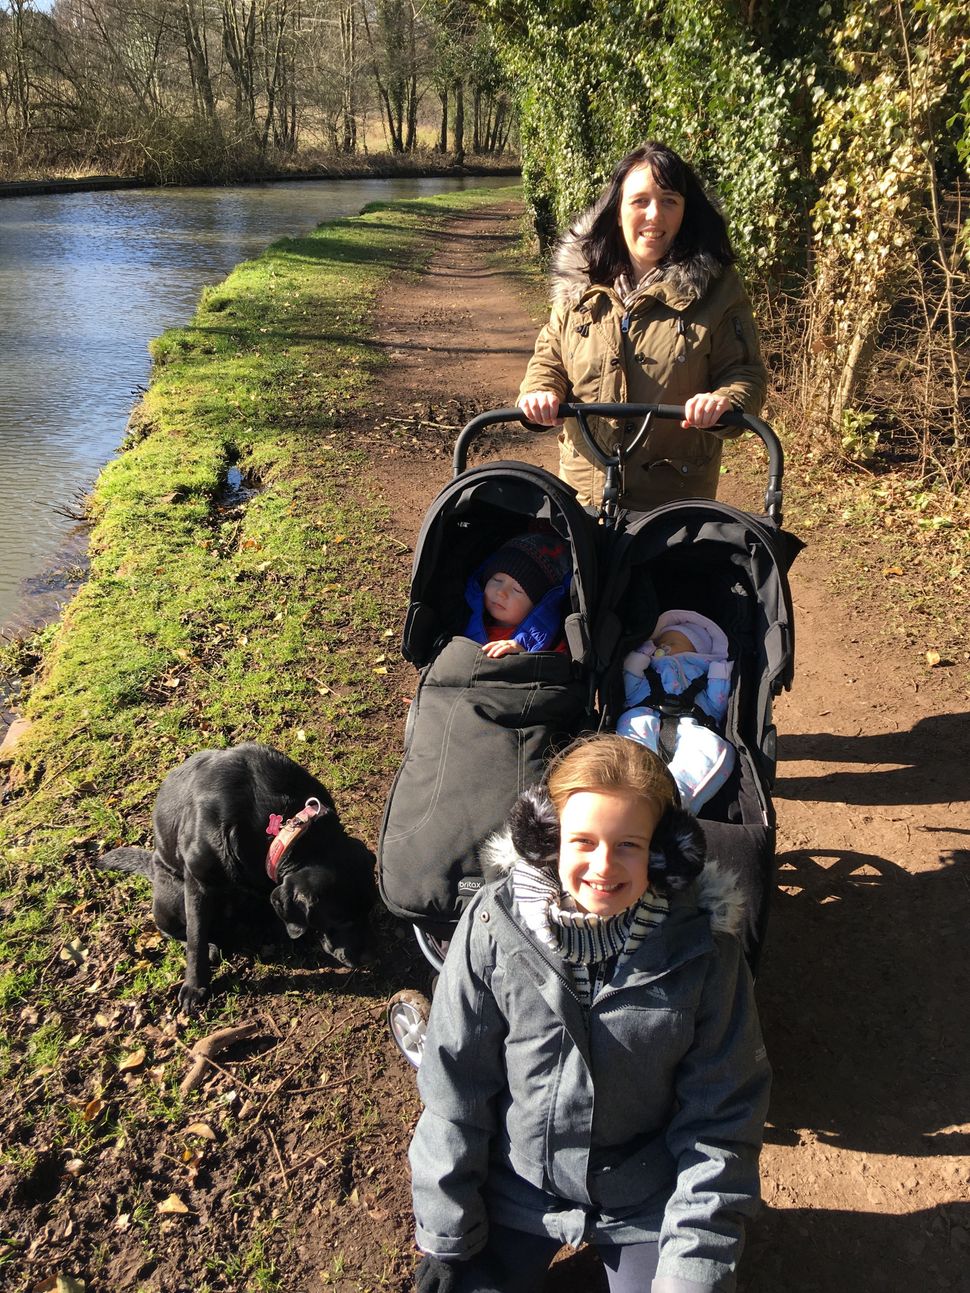 Gemma Gordon, 34, from Warwickshire, ensures she has one-on-one time with each of her three children: Isobel, nine, Lucas, 22 months and Lola, two months.